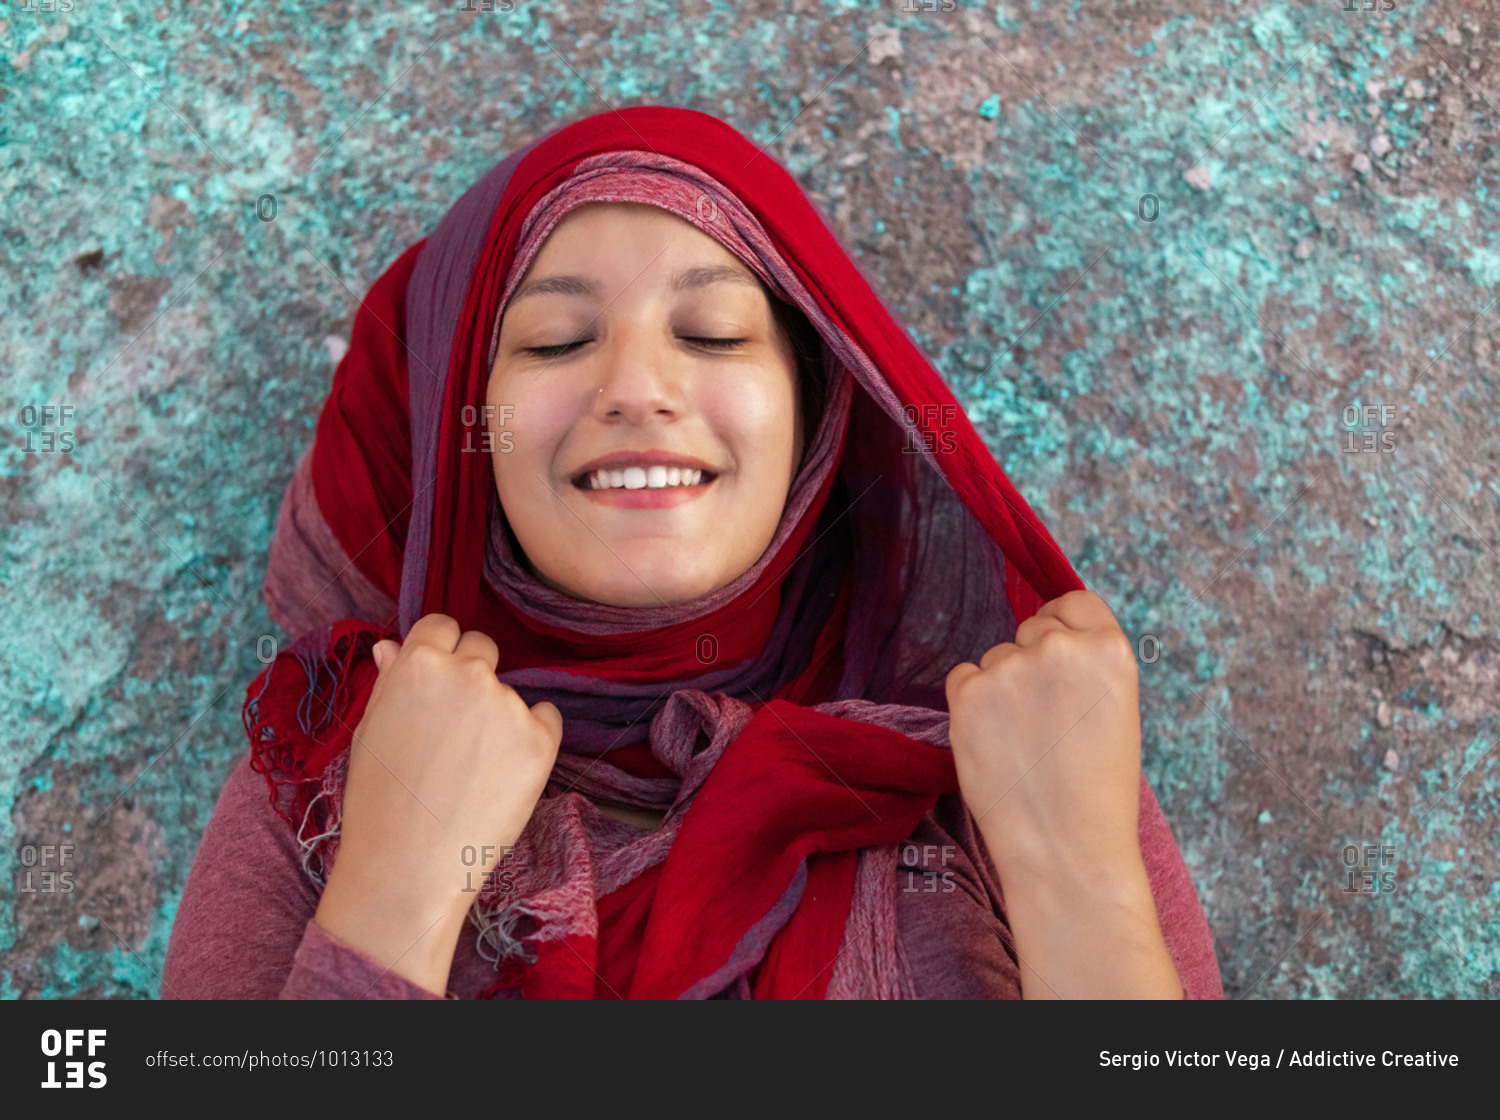 Happy Arab female wearing hijab leaning on concrete colorful building in city smiling with eyes closed